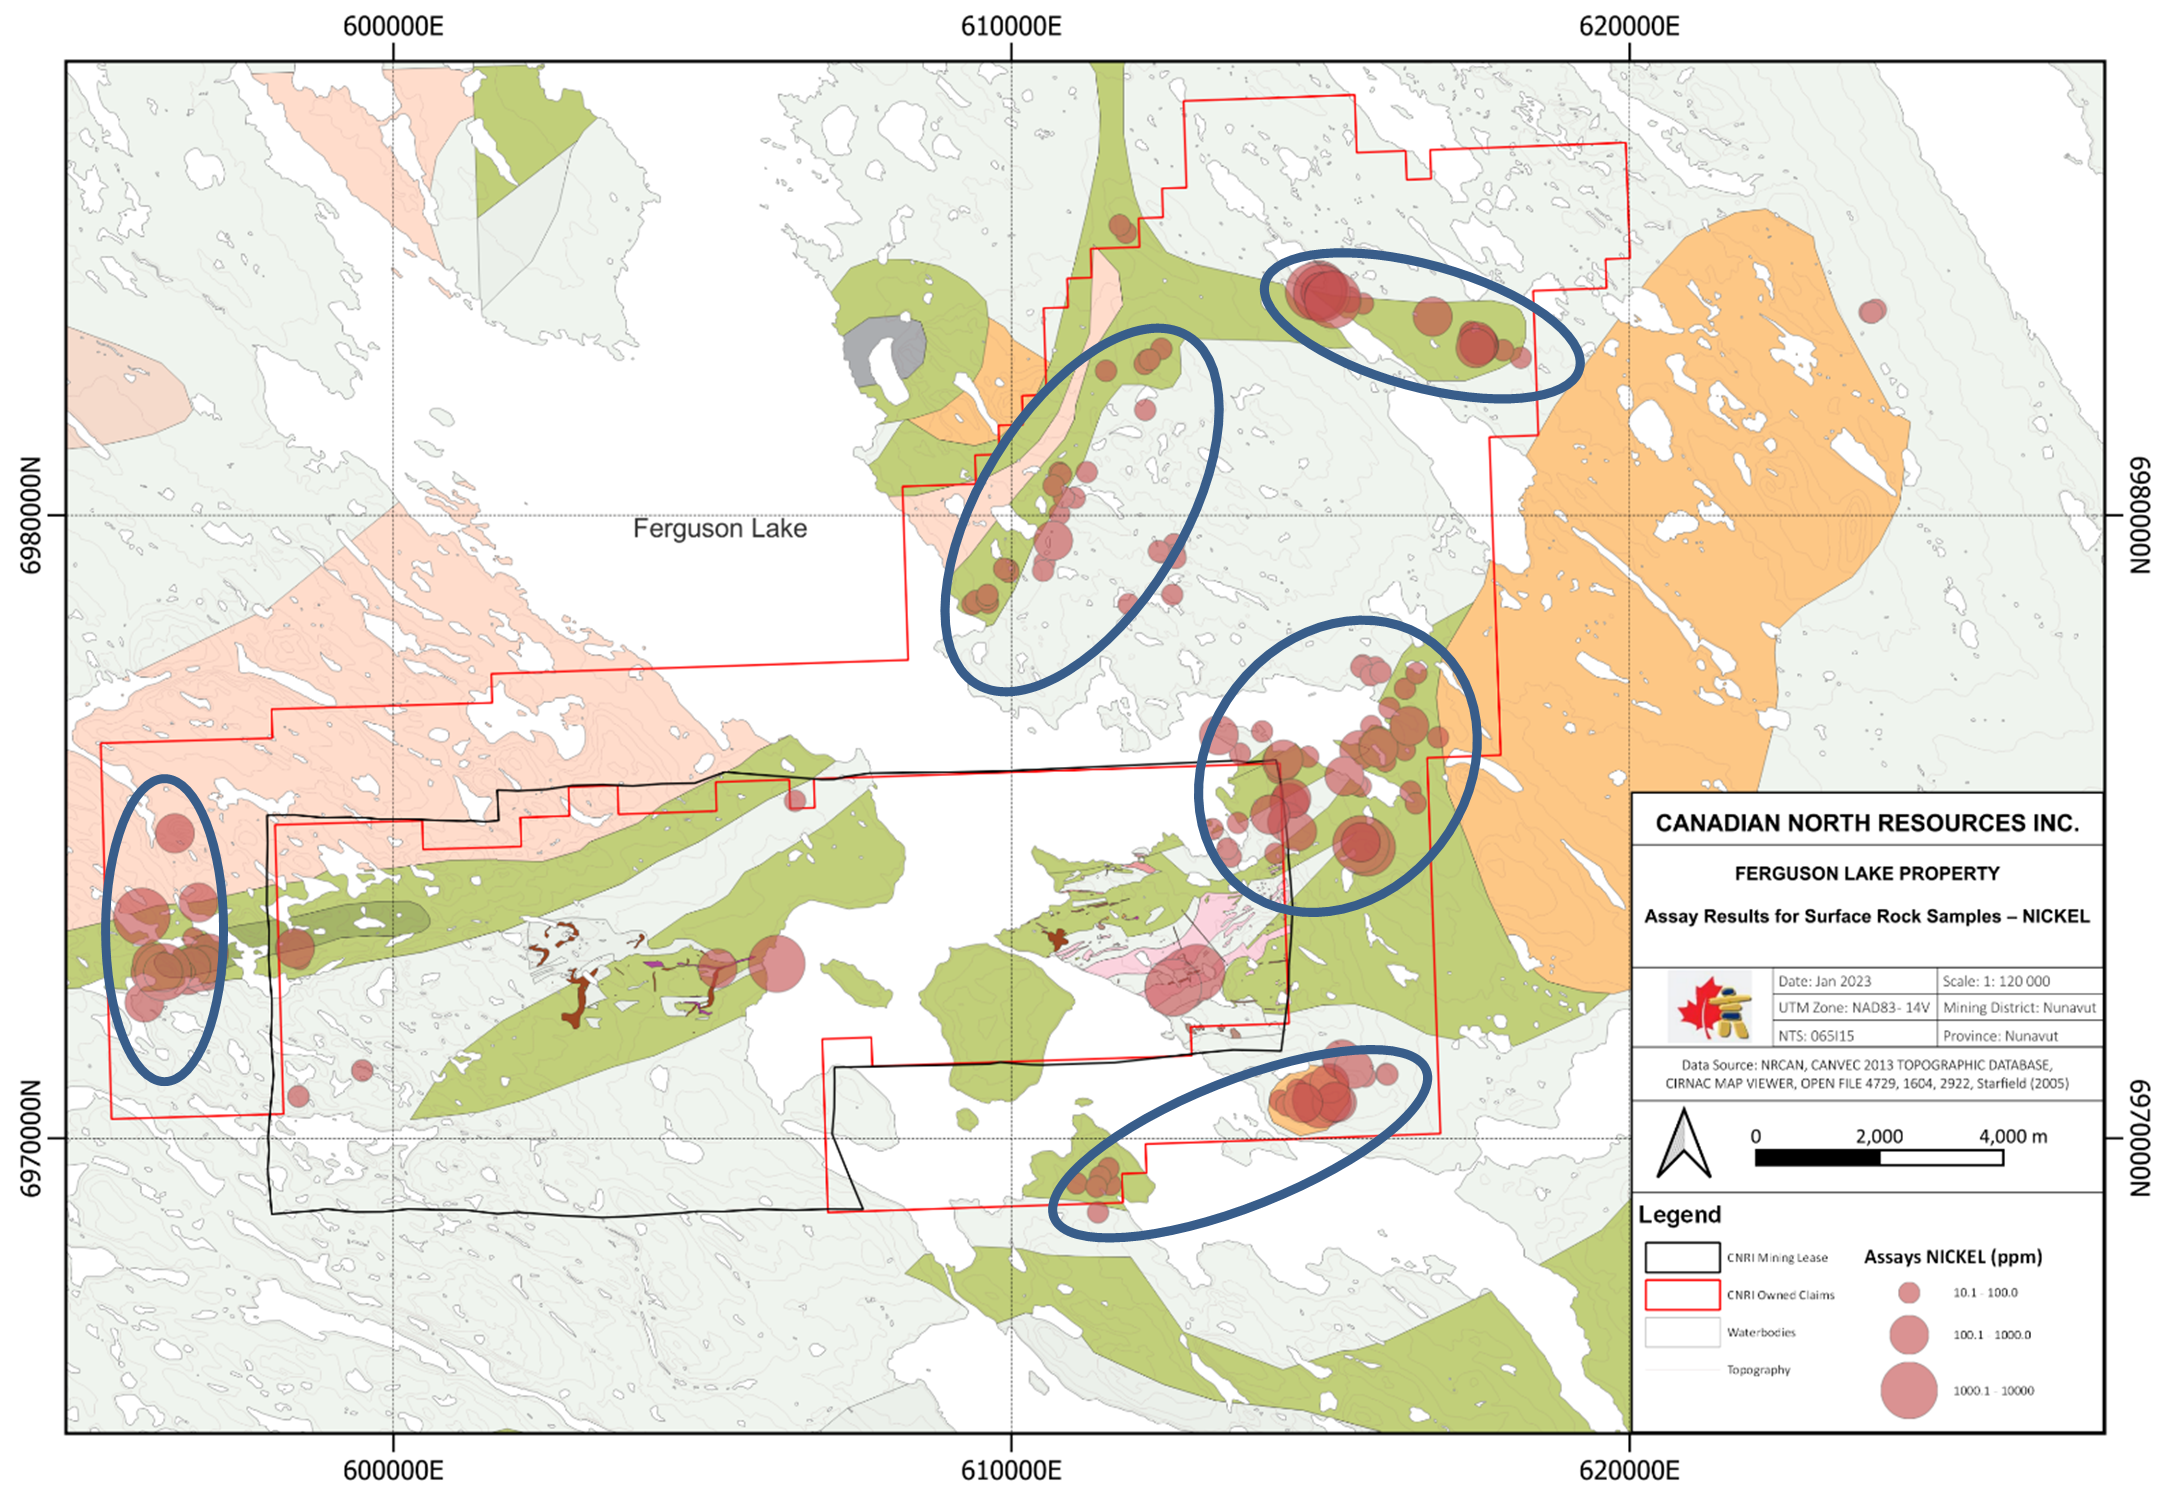 Five new targets identified in the exploration claims (156.9km2) outside the mining leases (96.9km2) of the Ferguson Lake Project